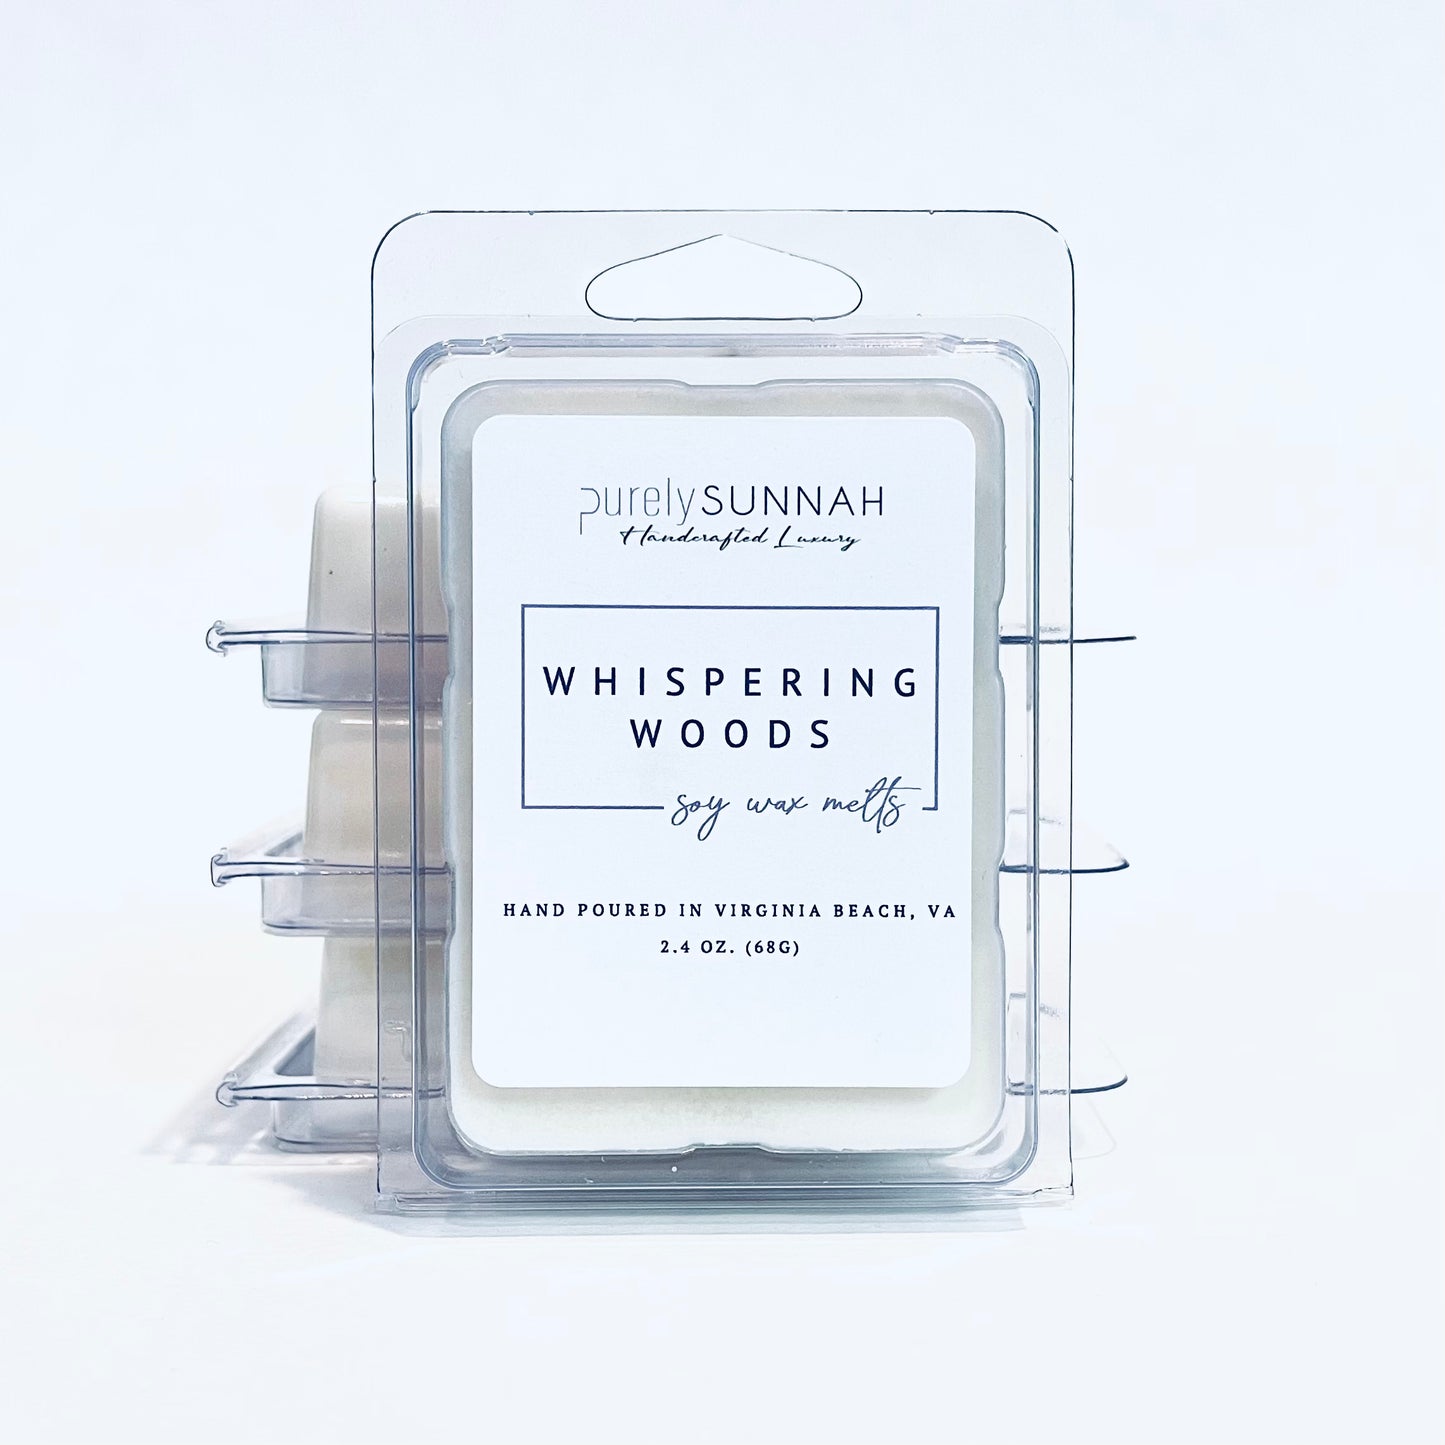 Whispering Woods Wax Melts